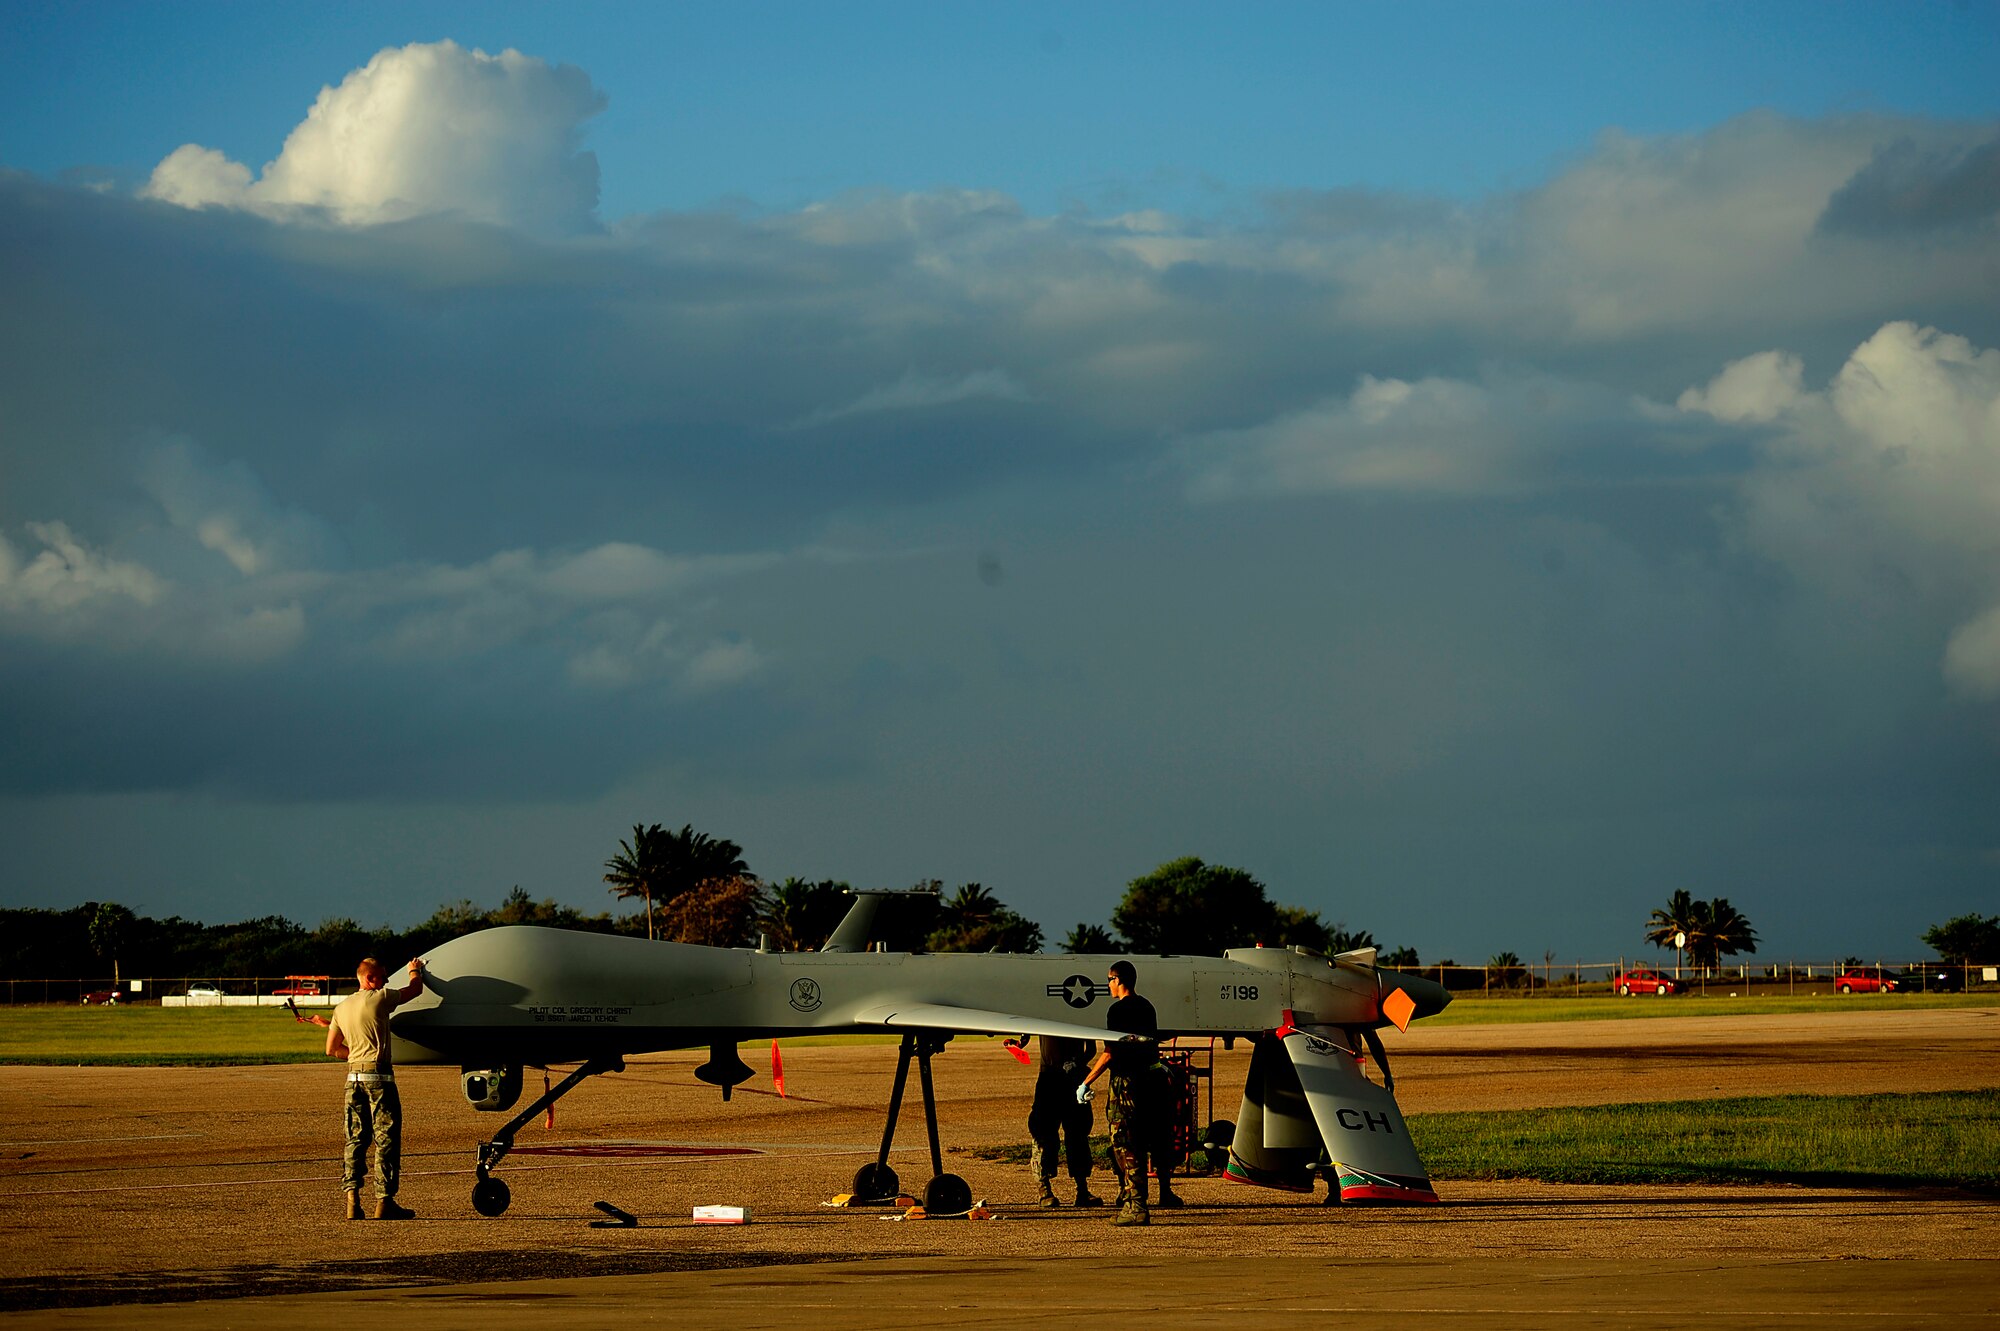 U.S. Air Force maintenance personnel from the 432nd Aircraft Maintenance Sq., Creech Air Force Base, Nevada conduct pre-flight maintenance on an RQ-1 Predator at Aeropuerto Rafael Hernandez outside Aguadilla, Puerto Rico on 28 Jan., 2010.  The RQ-1 remotely piloted systems are operating out of Puerto Rico in support of Operation Unified Response in Haiti.  Airmen from Creech Air Force Base, Las Vegas, Nev. are providing 24 hour a day full-motion video in real time to international relief workers on the ground in order to speed humanitarian aid to remote and cut-off areas of the country following the earthquake on 12 Jan., 2010. (U.S. Air Force photo by Tech. Sgt. James L. Harper Jr.)